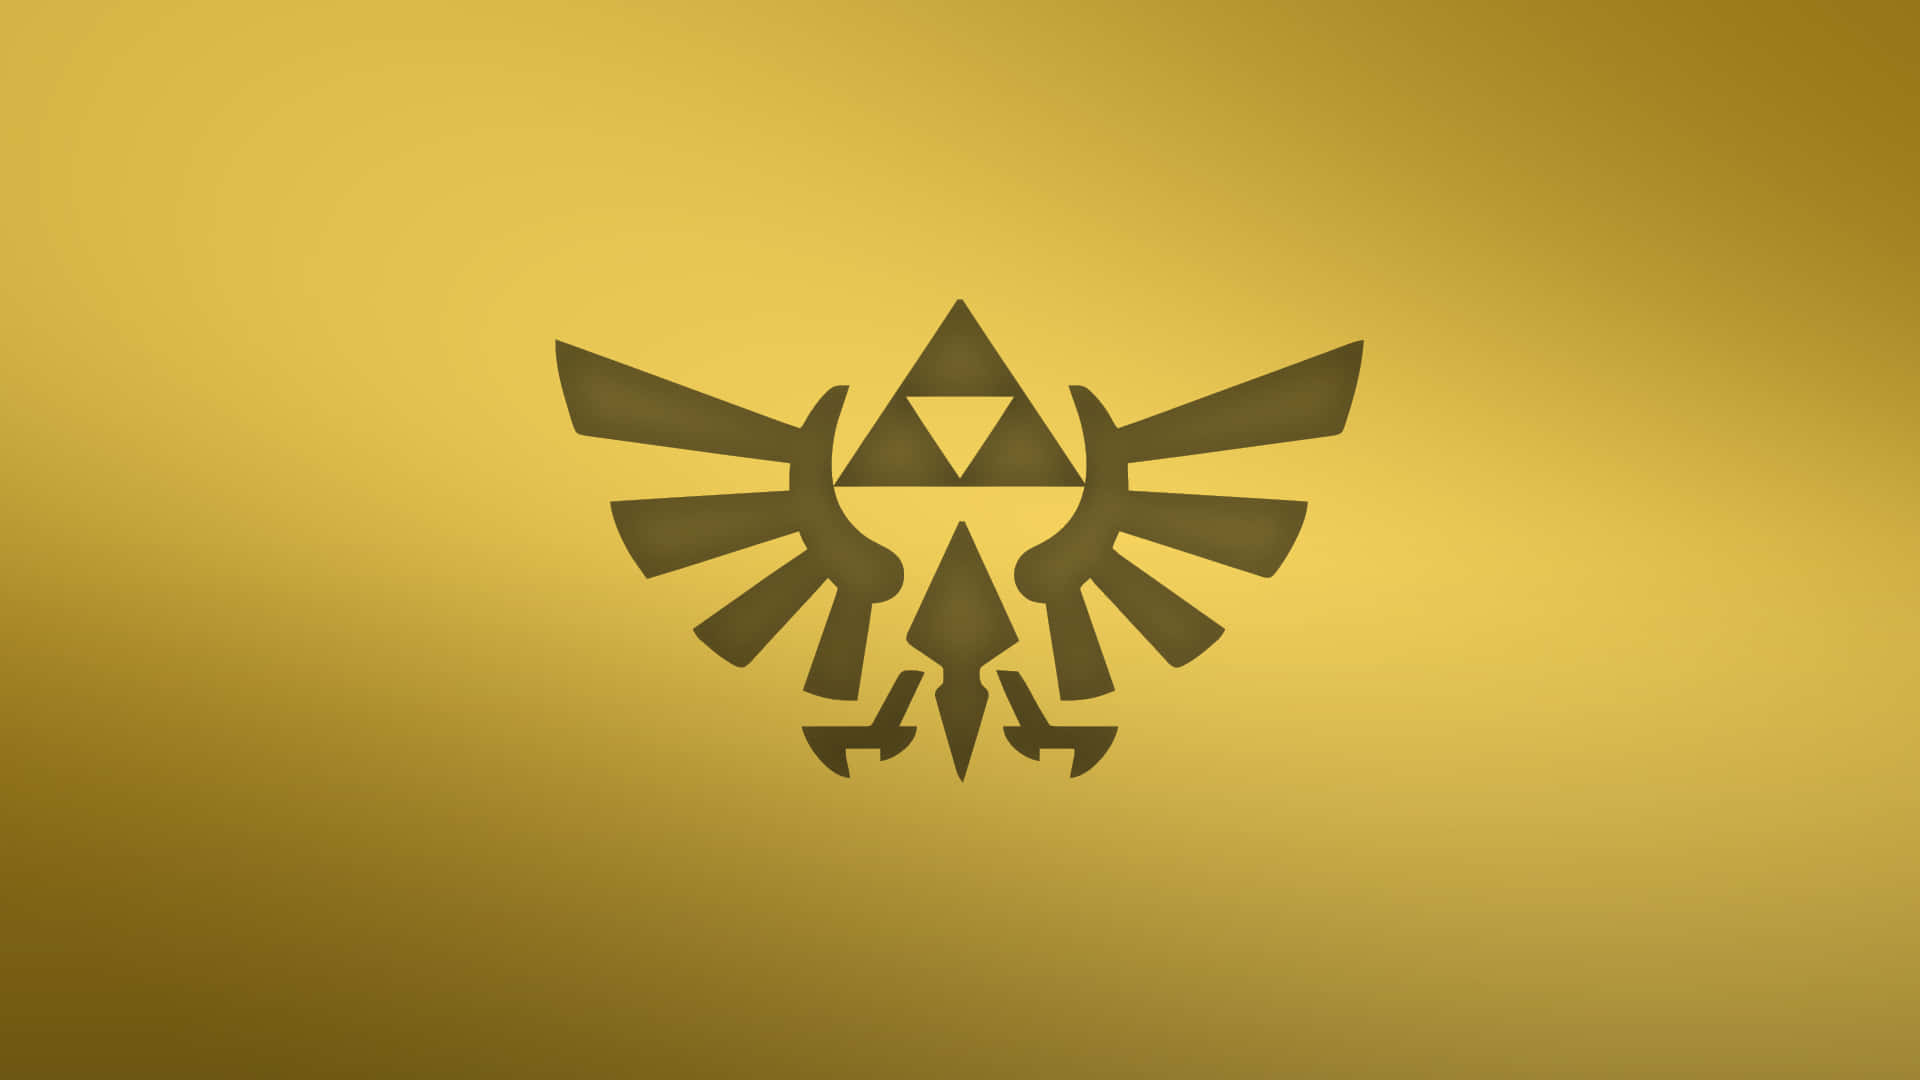 The Almighty Triforce!